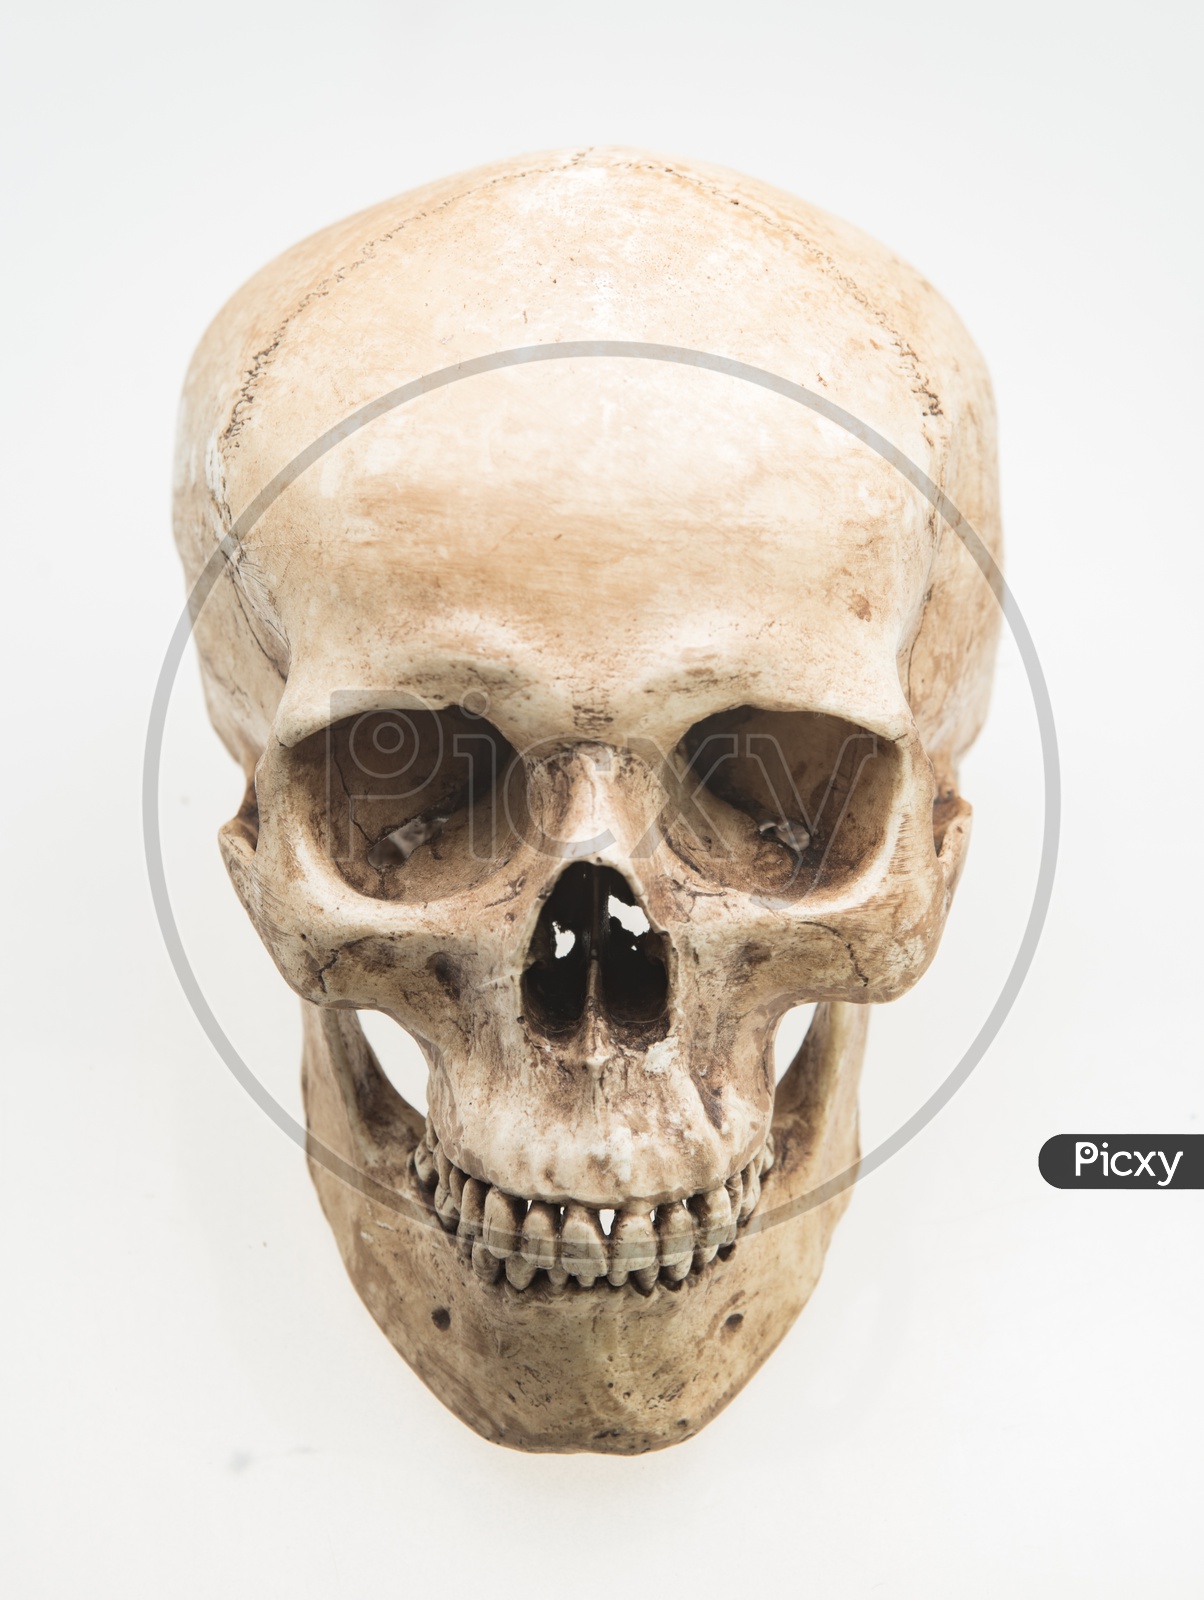 Front view of model of human skull, isolated on white